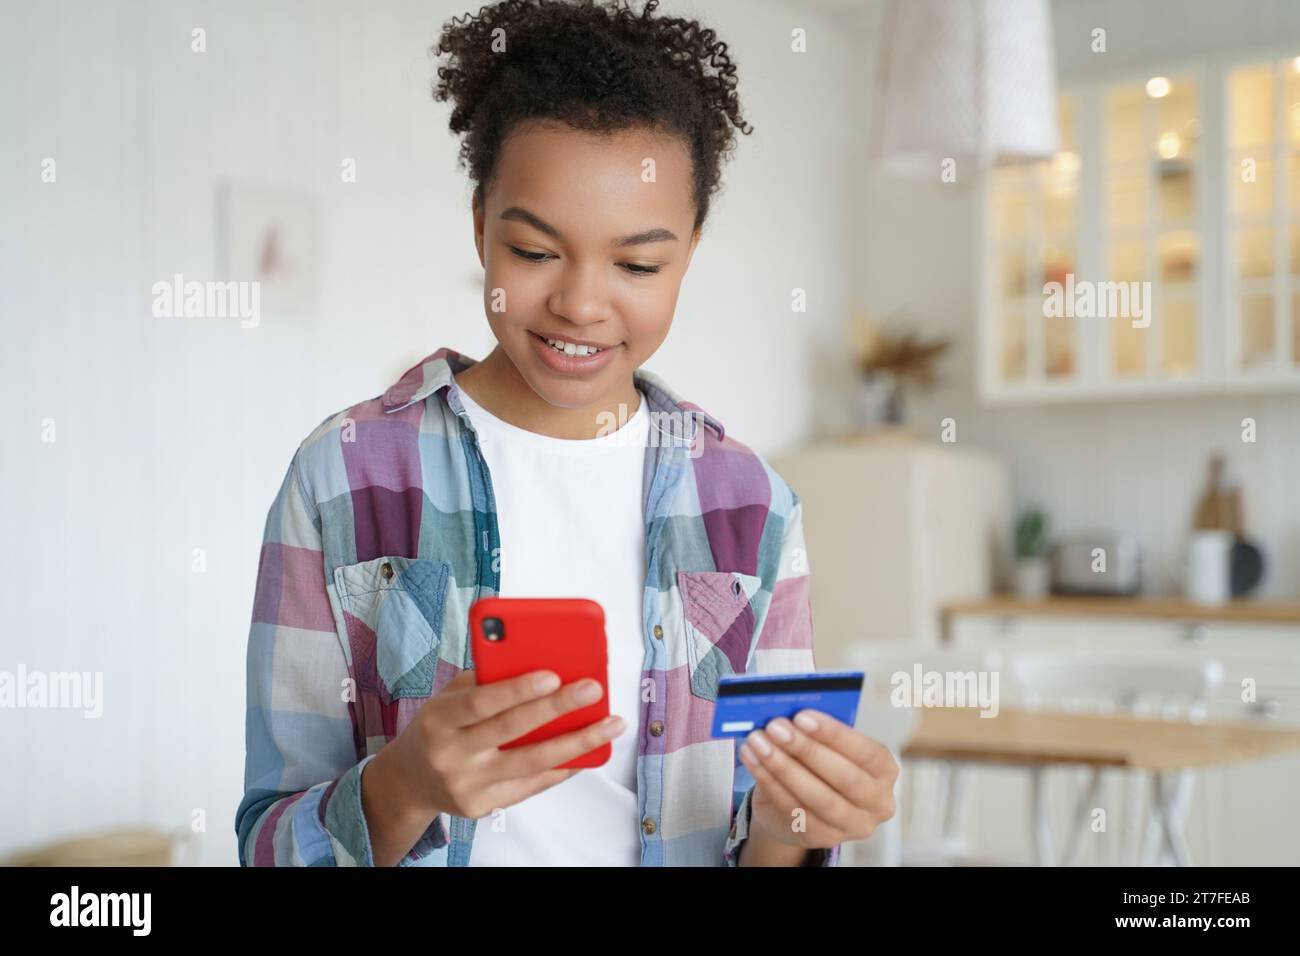 Black teenager online shopping with a phone and credit card, smiling Stock Photo